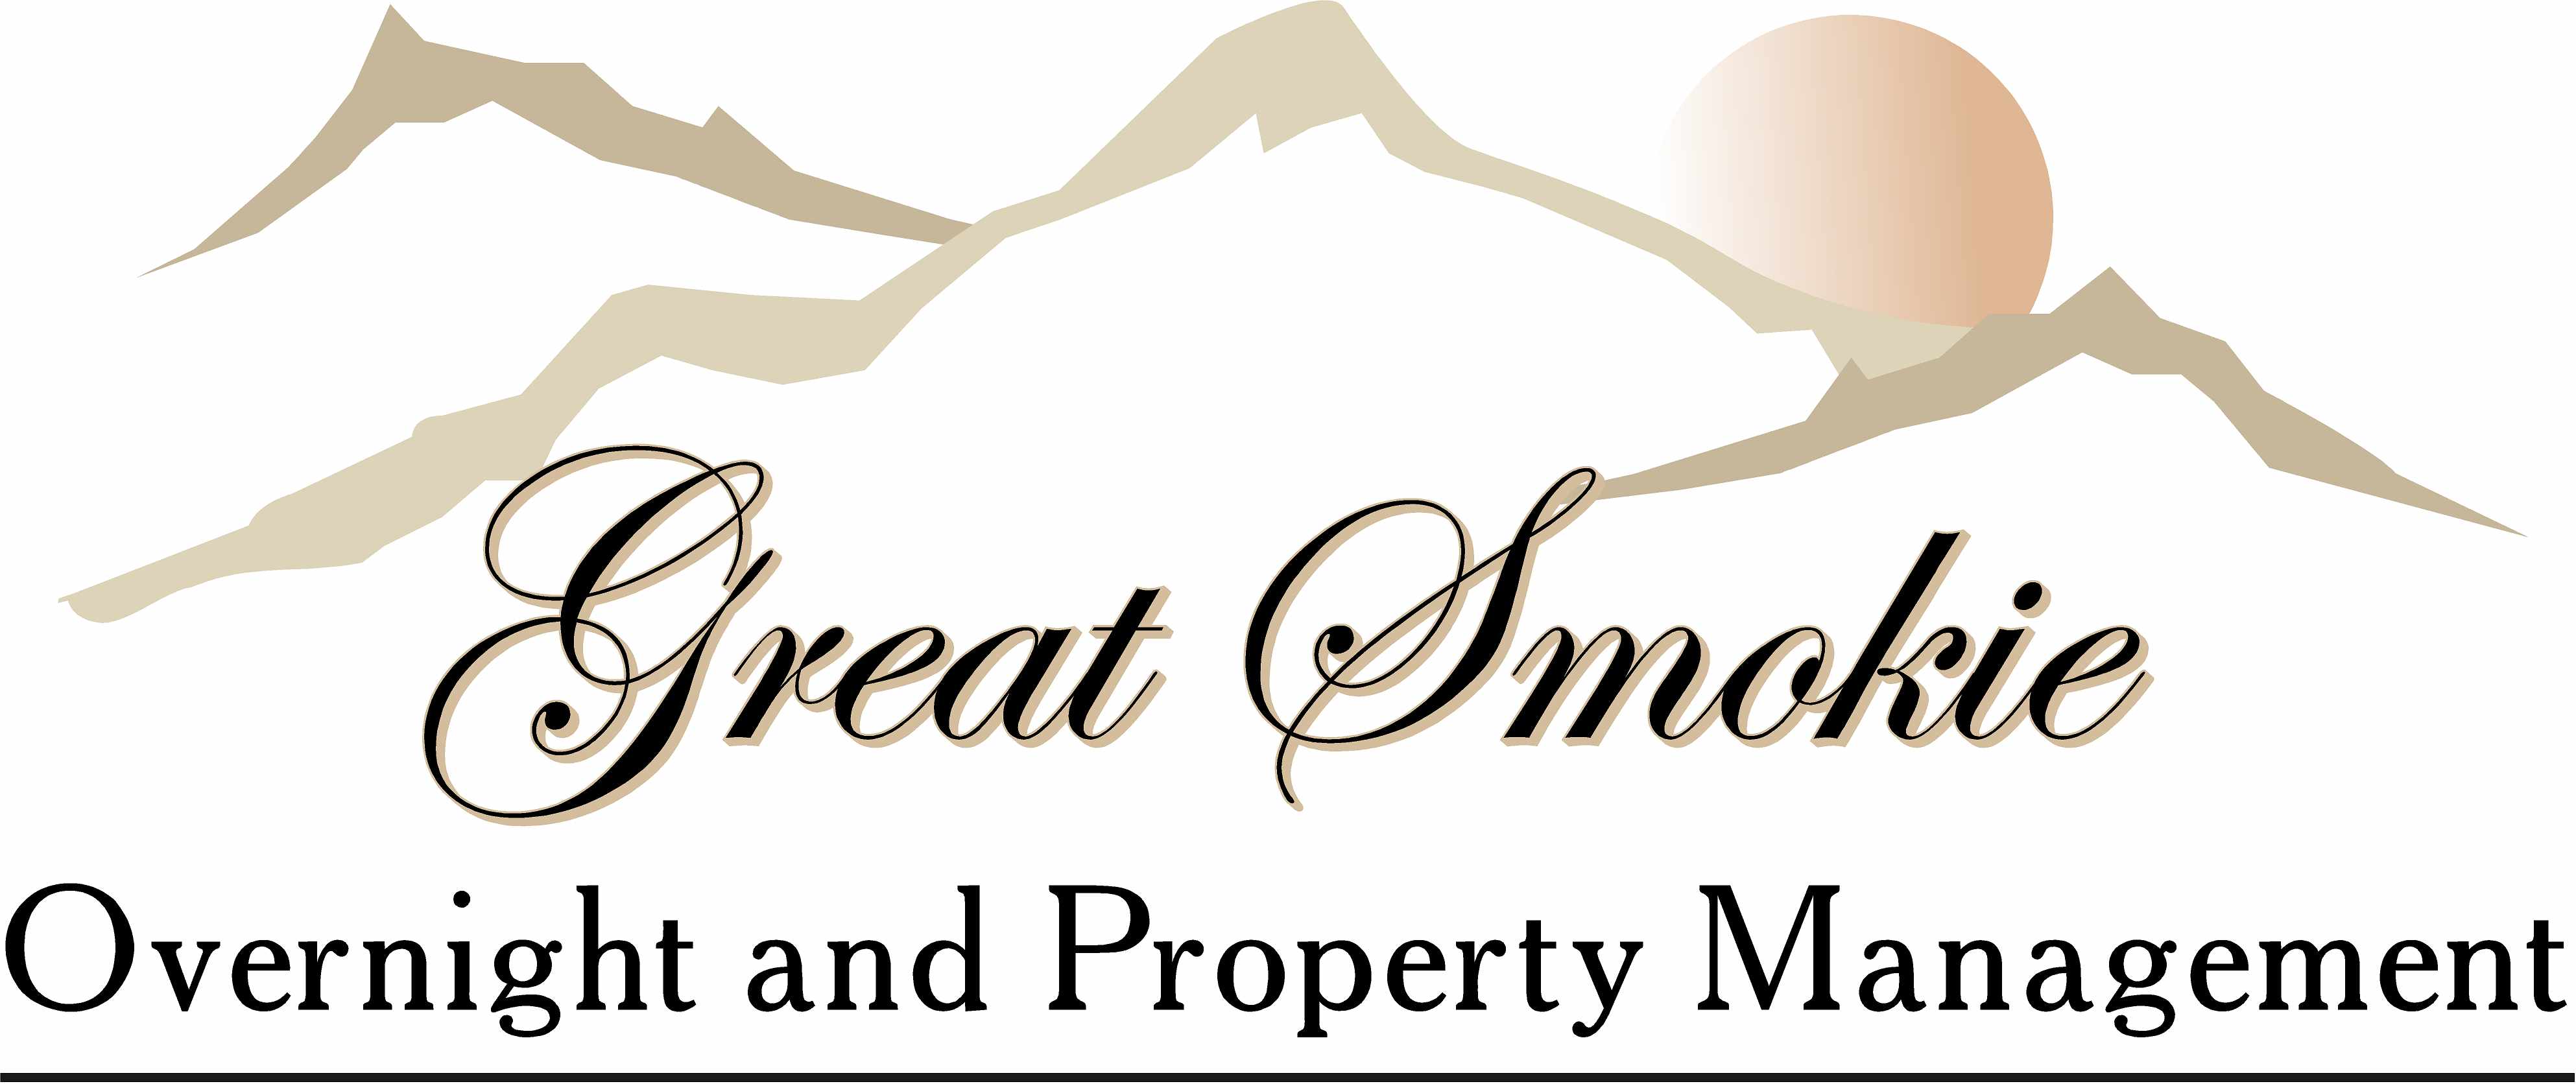 Great Smokie Overnight and Property Management